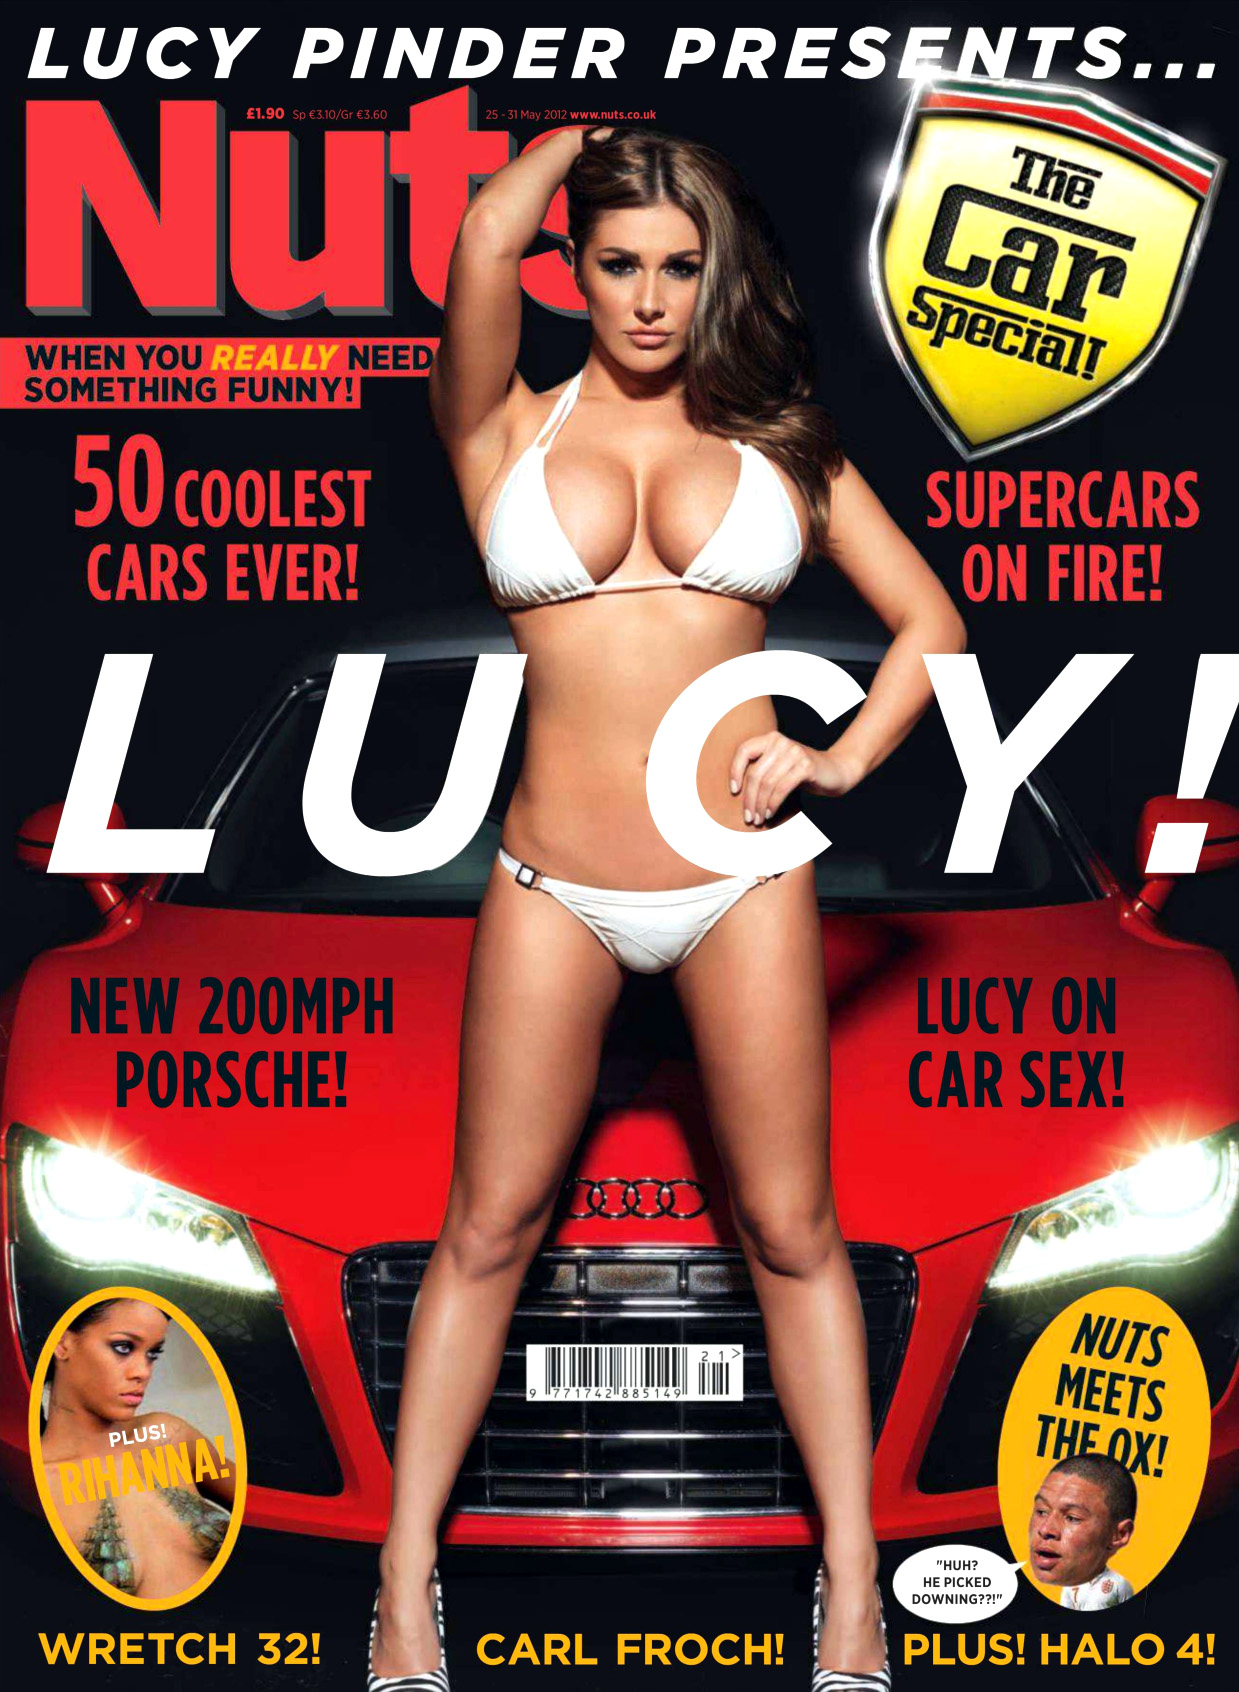 Lucy Pinder for Nuts Magazine “The Car Special”